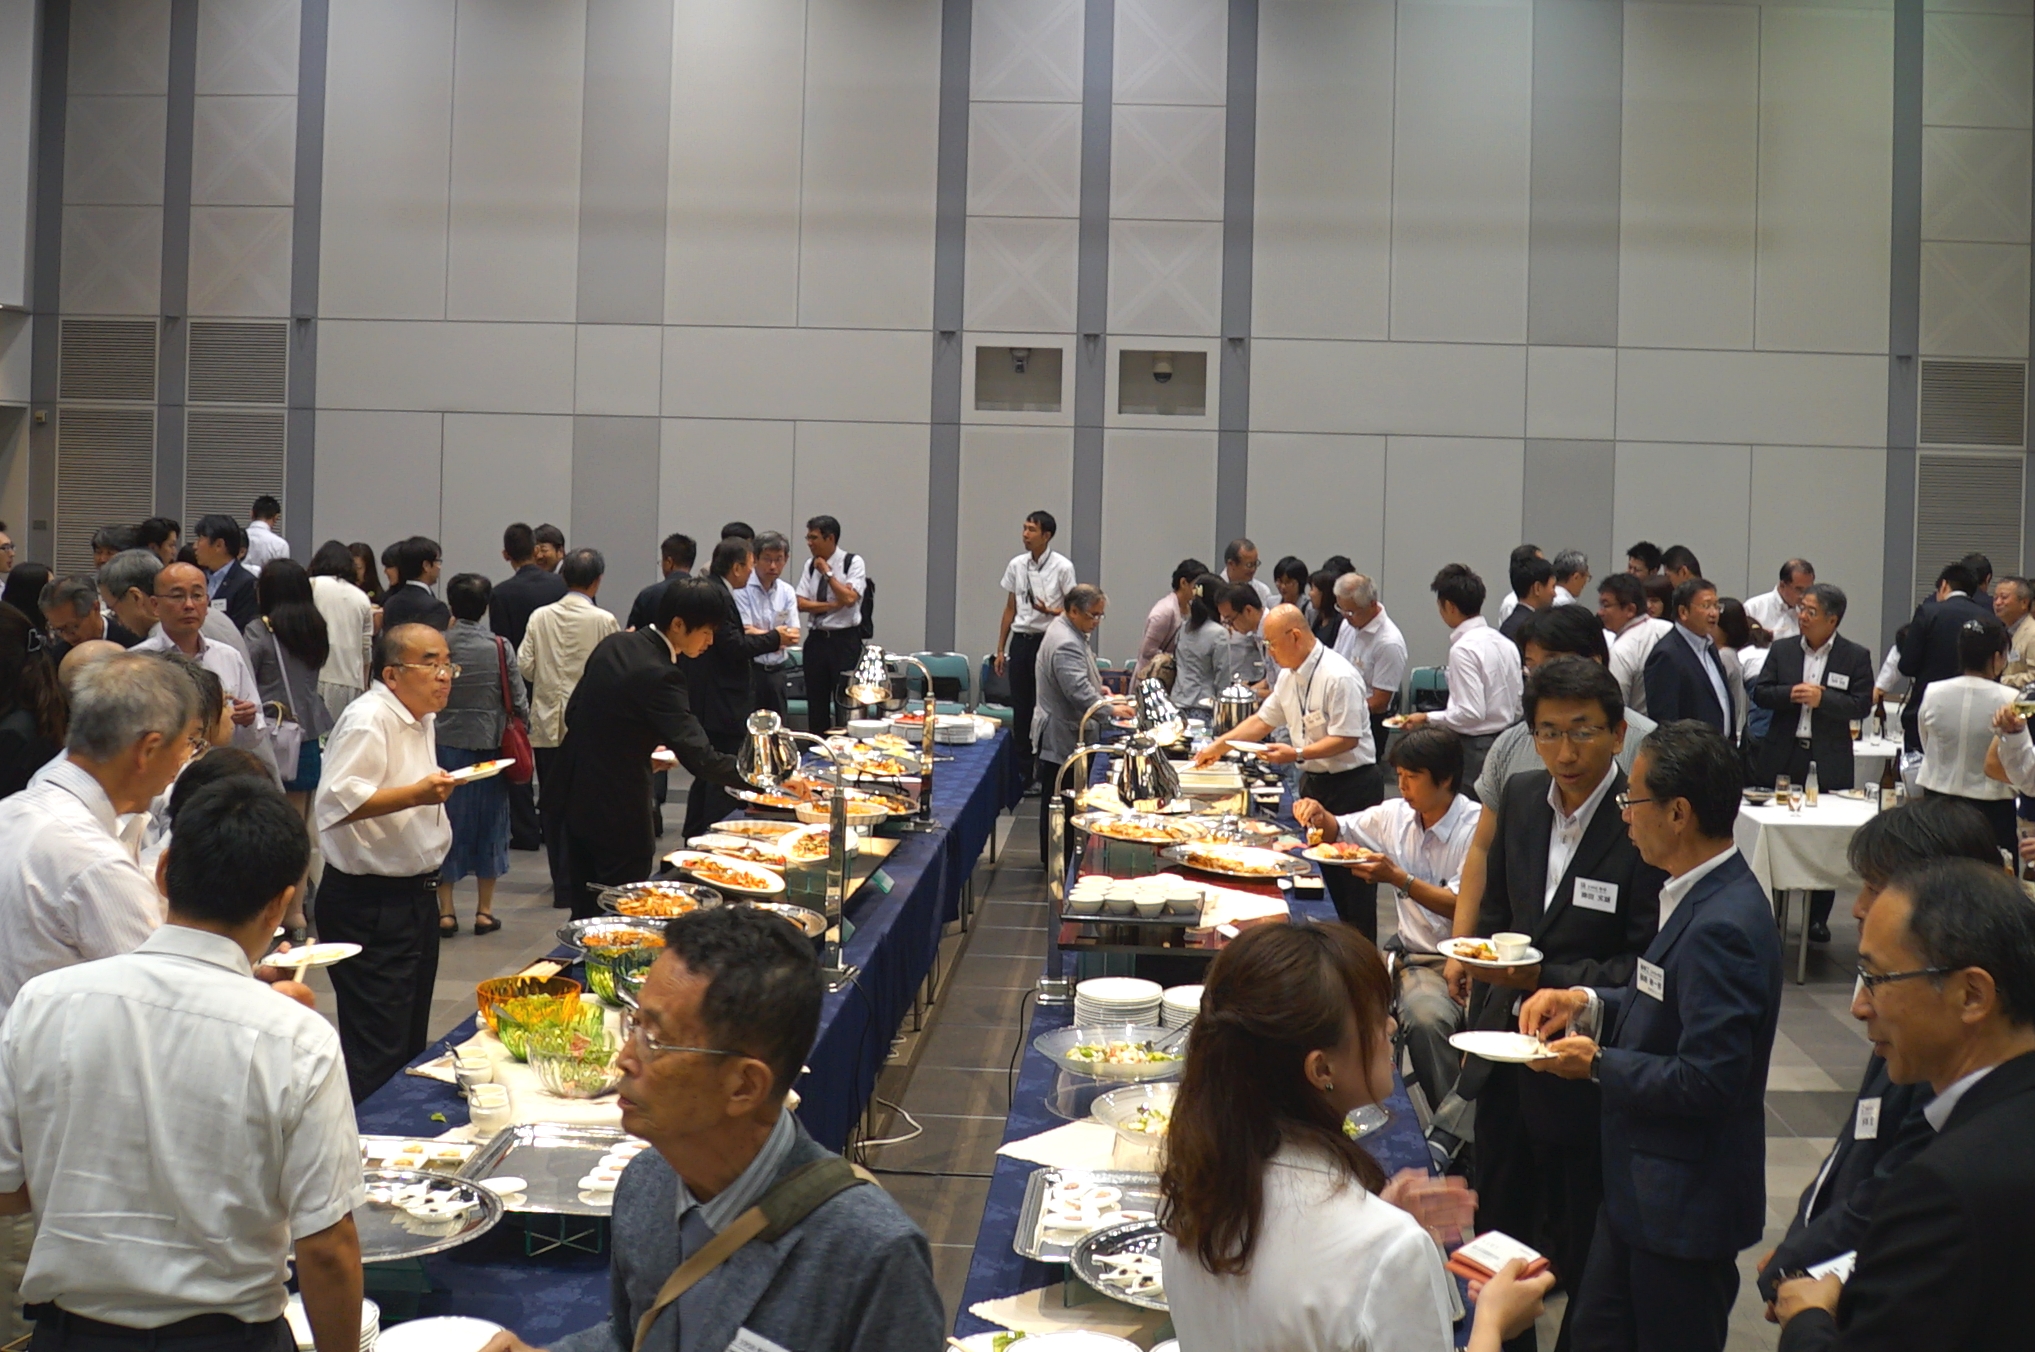 Some 170 Members of the OU Family Attend the Osaka Alumni Reunion in Okayama